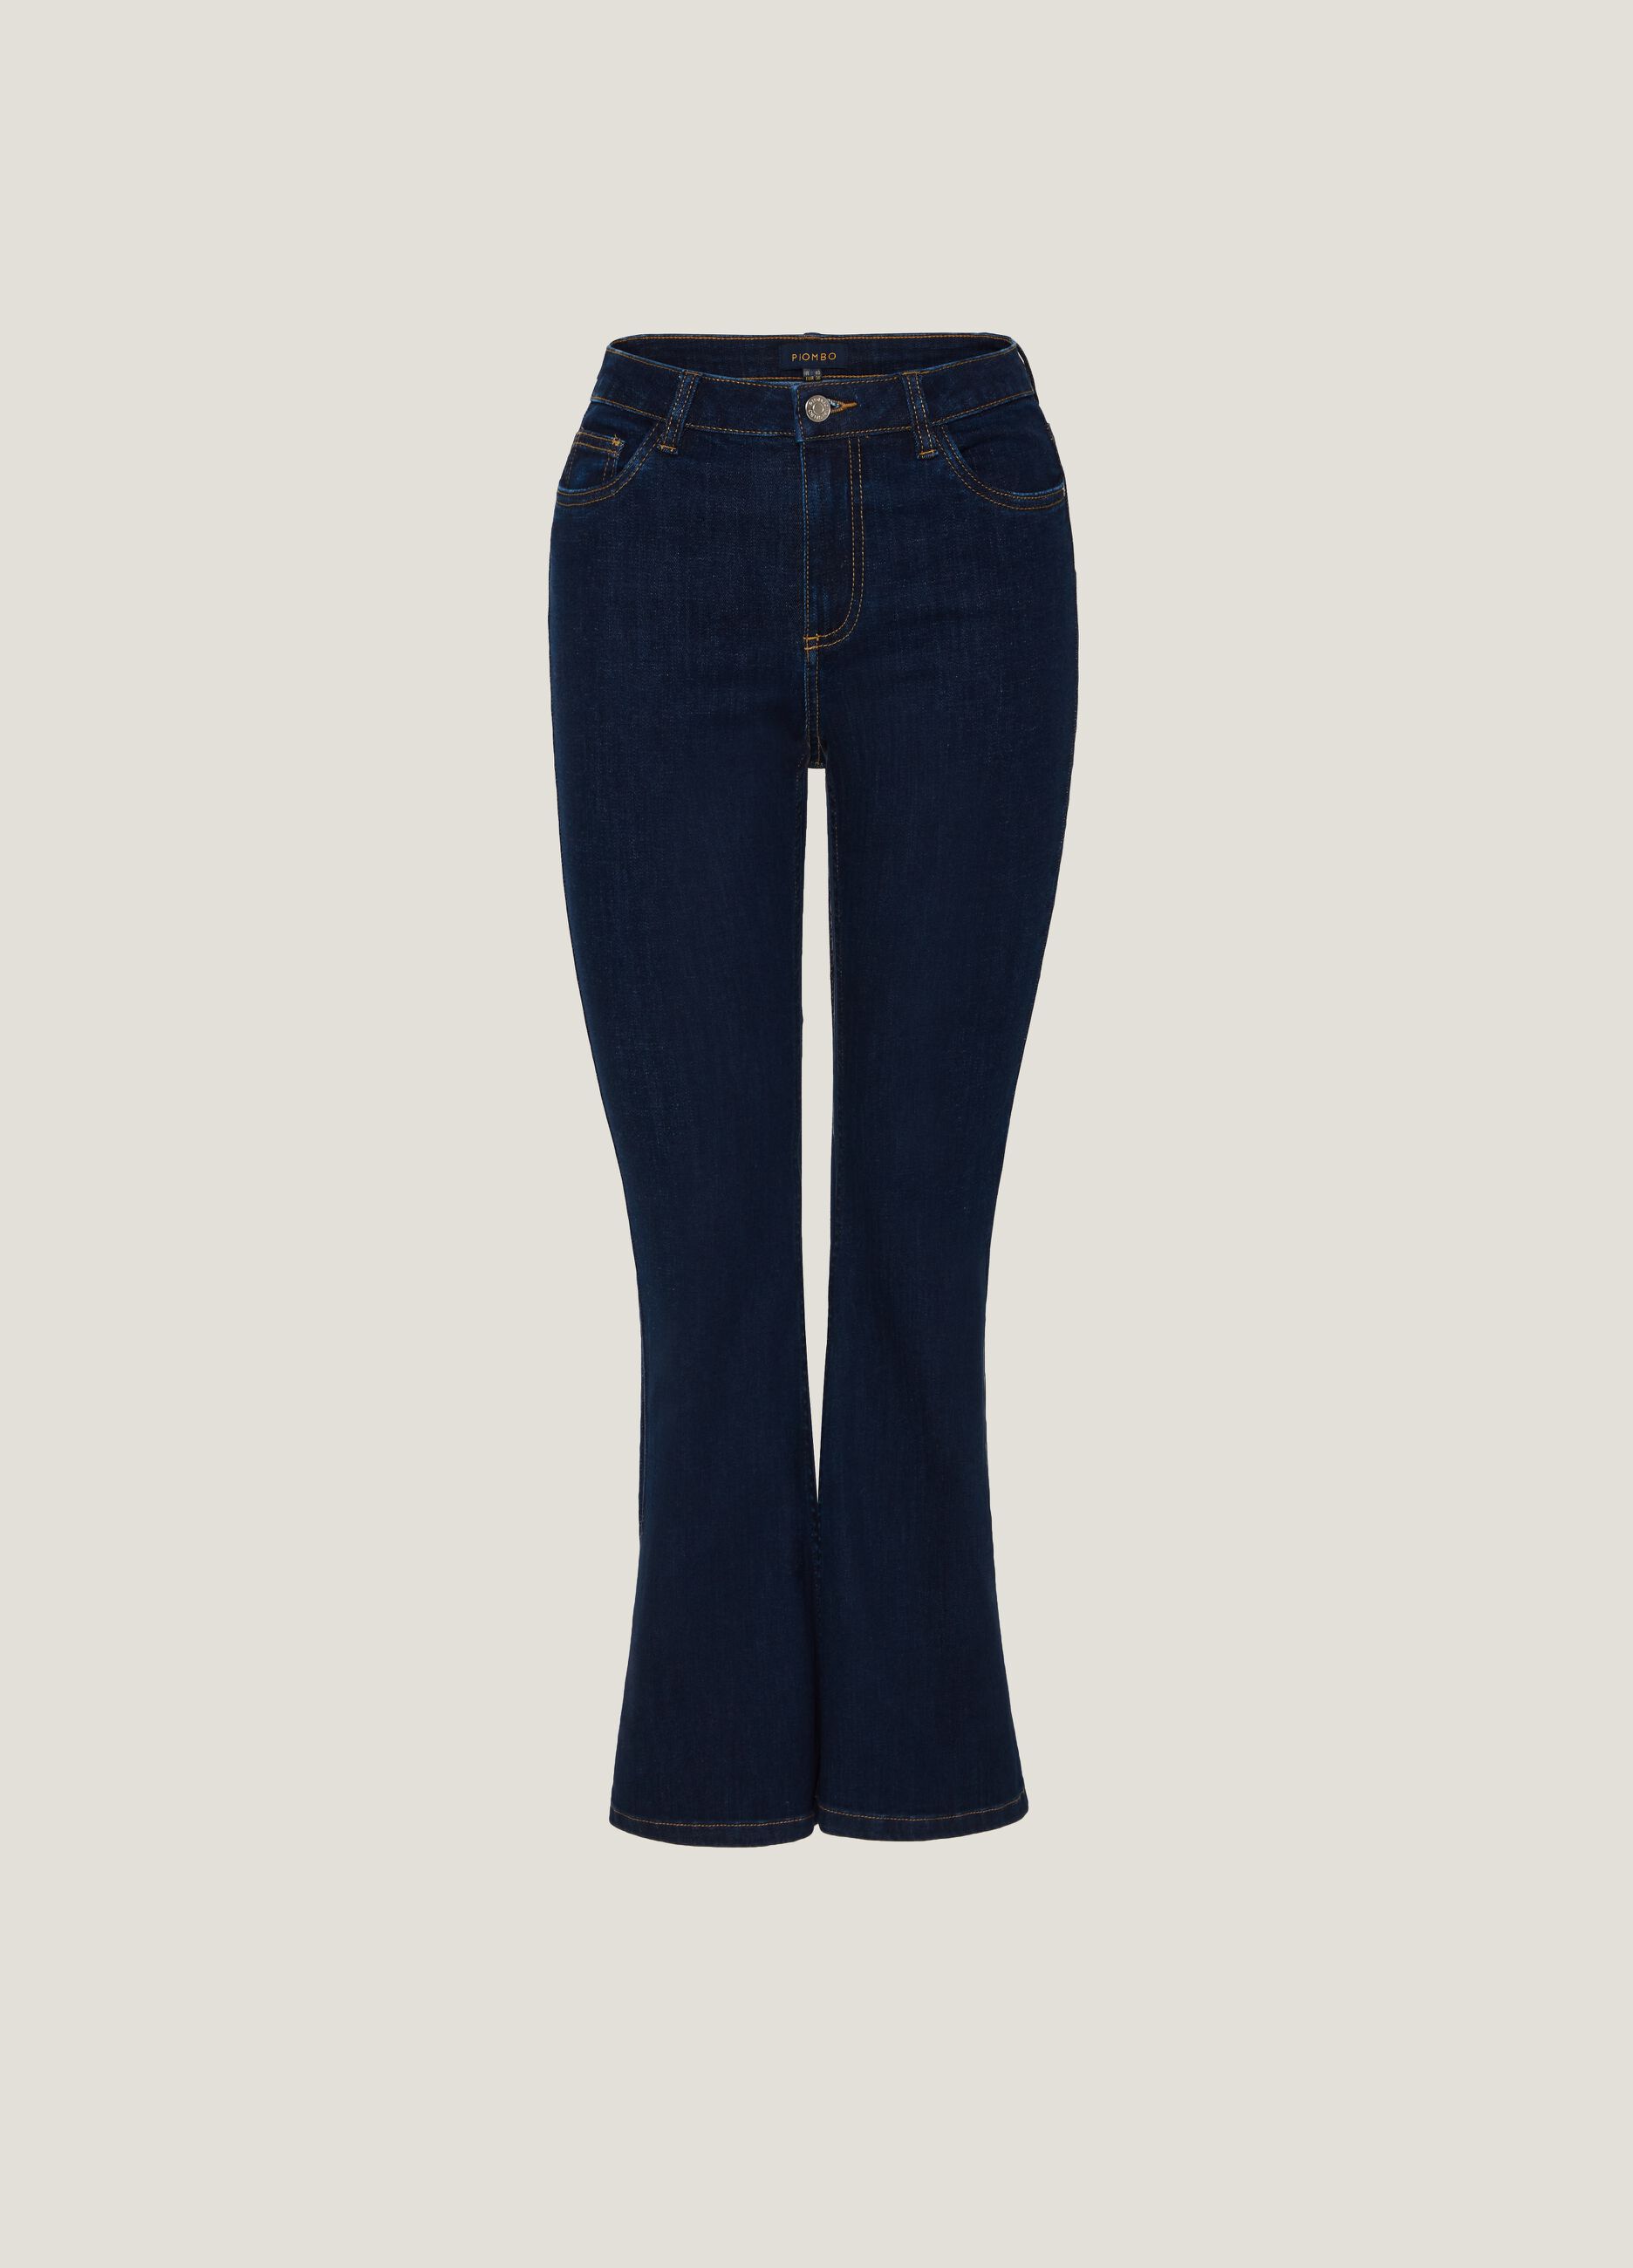 Boot cut jeans with five pockets